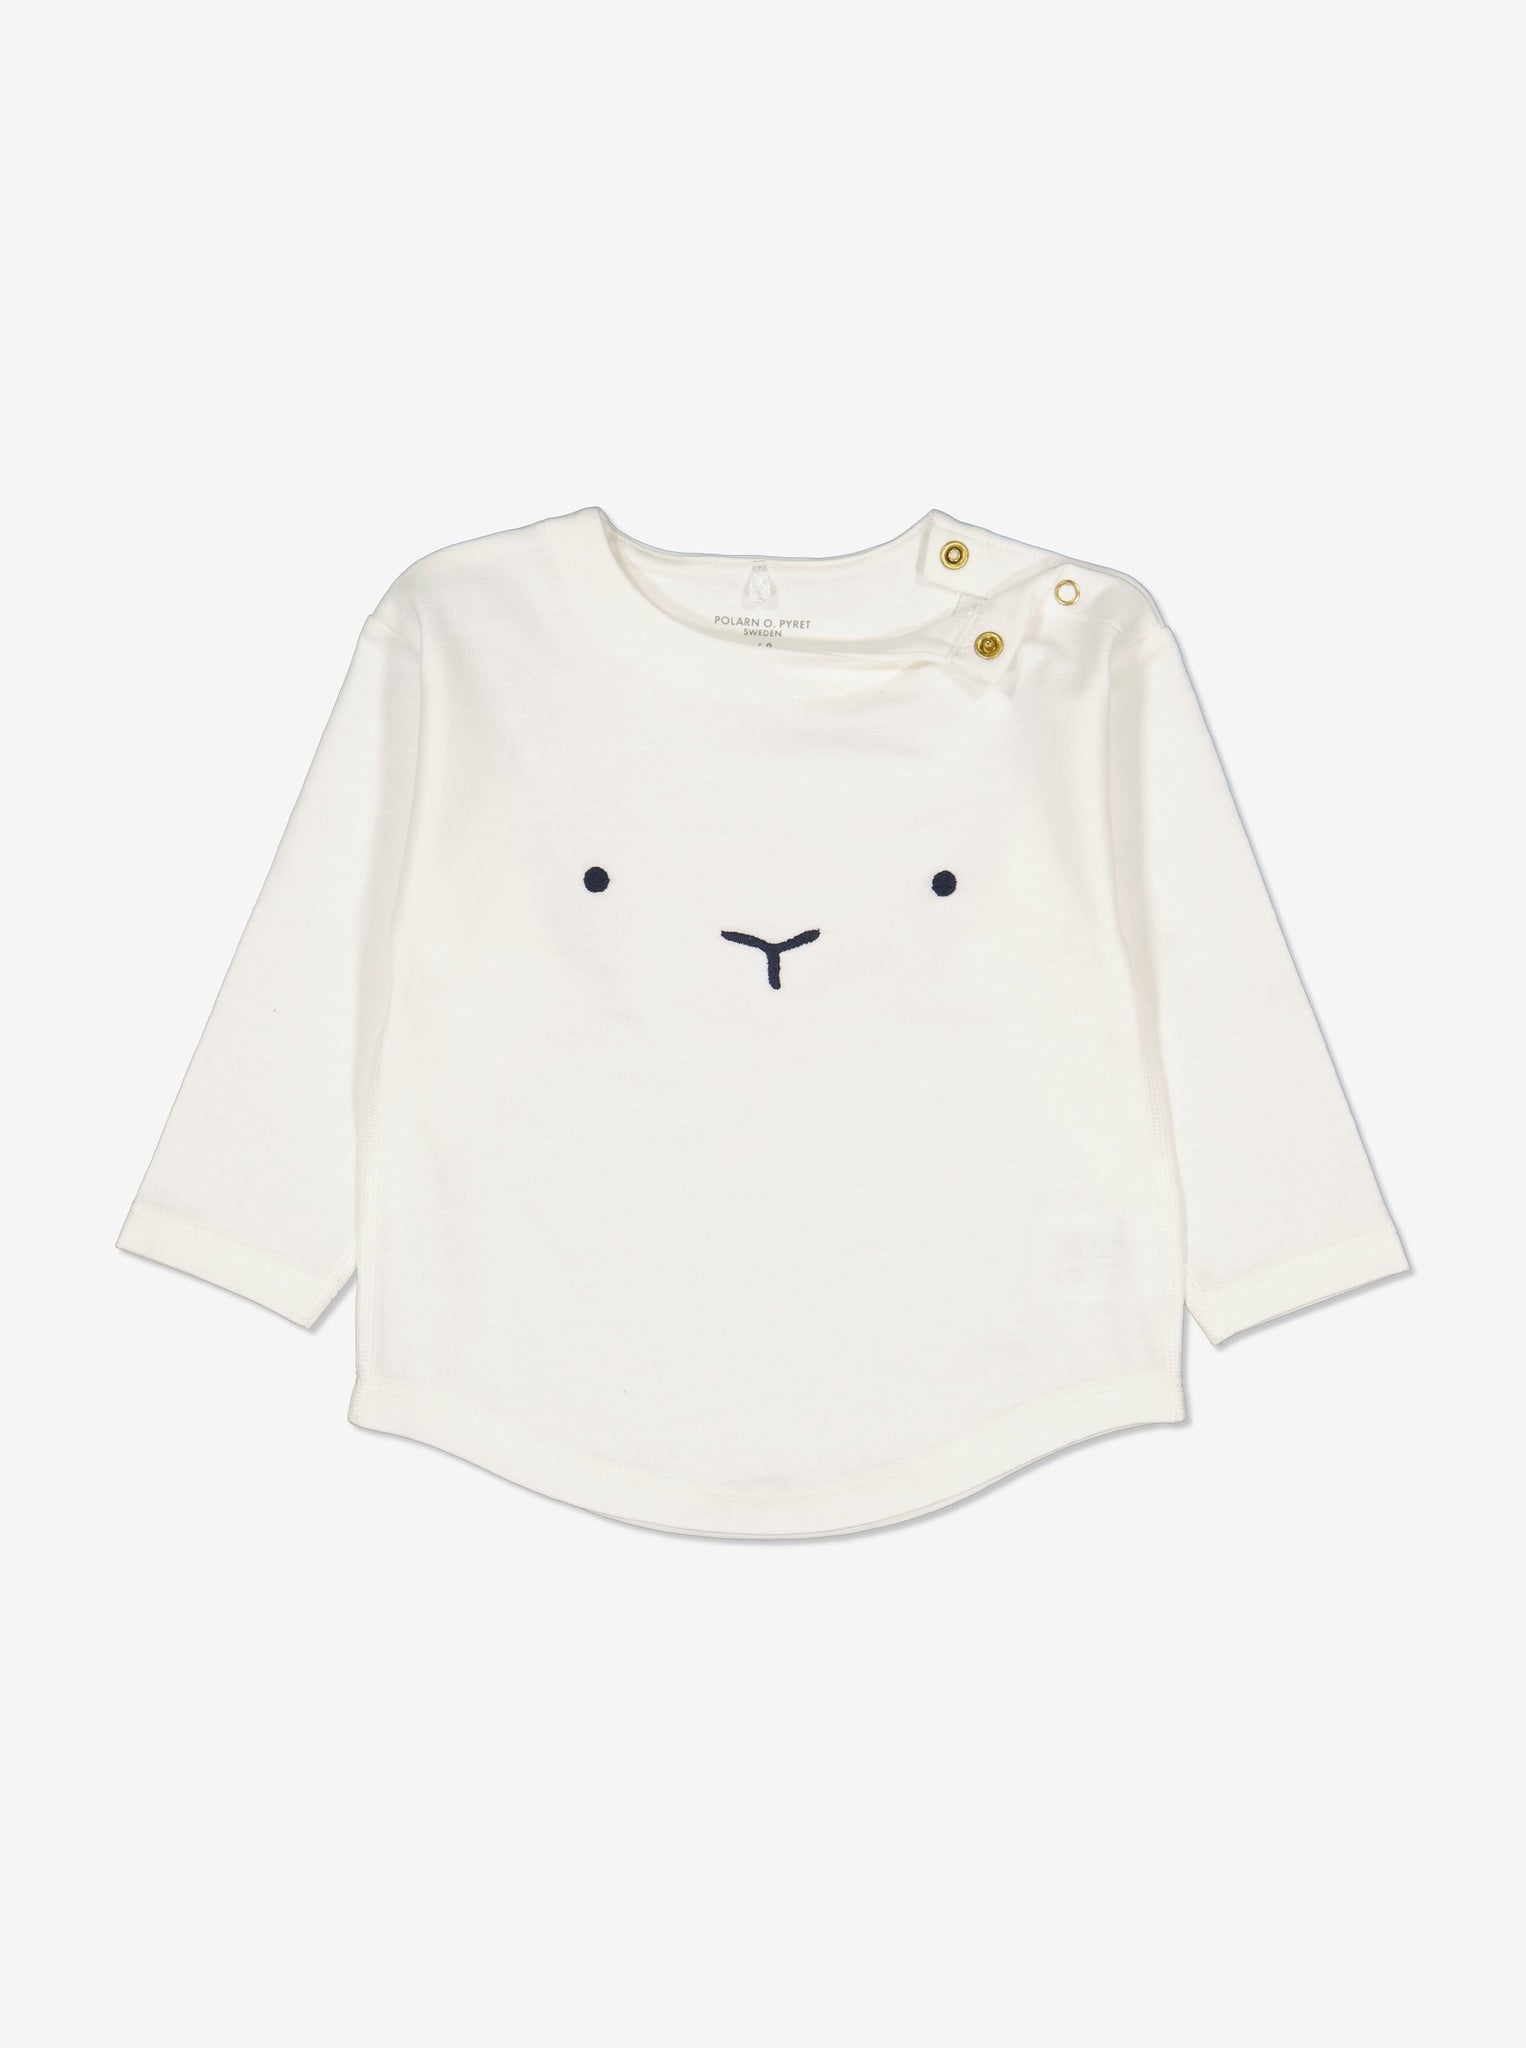  Organic White Rabbit Newborn Baby Top from Polarn O. Pyret Kidswear. Made from eco-friendly materials.